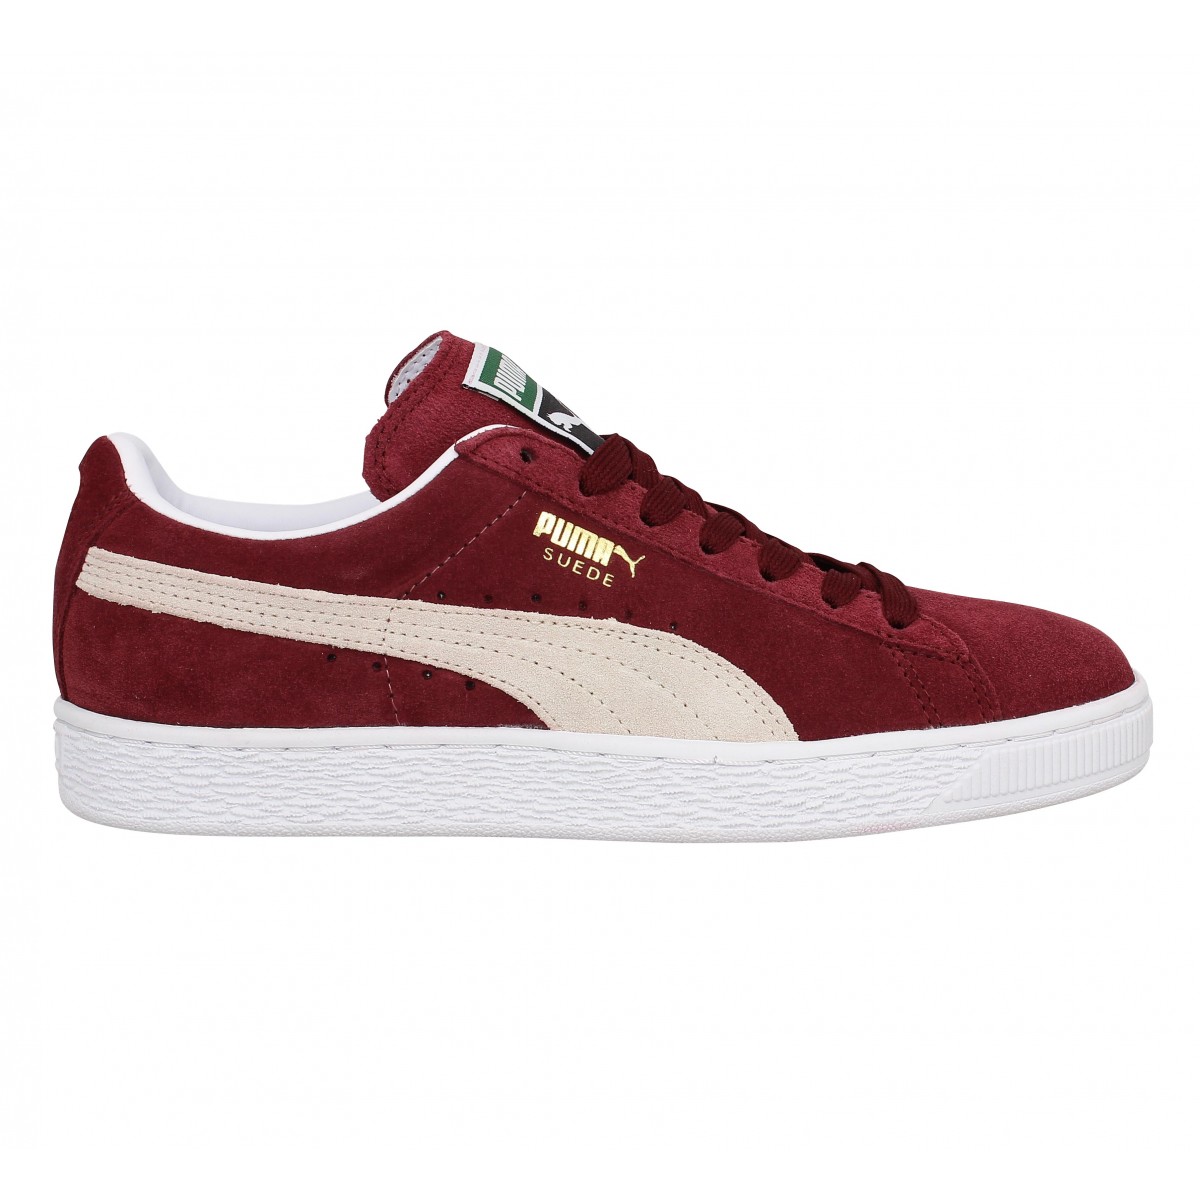 comment taille puma suede